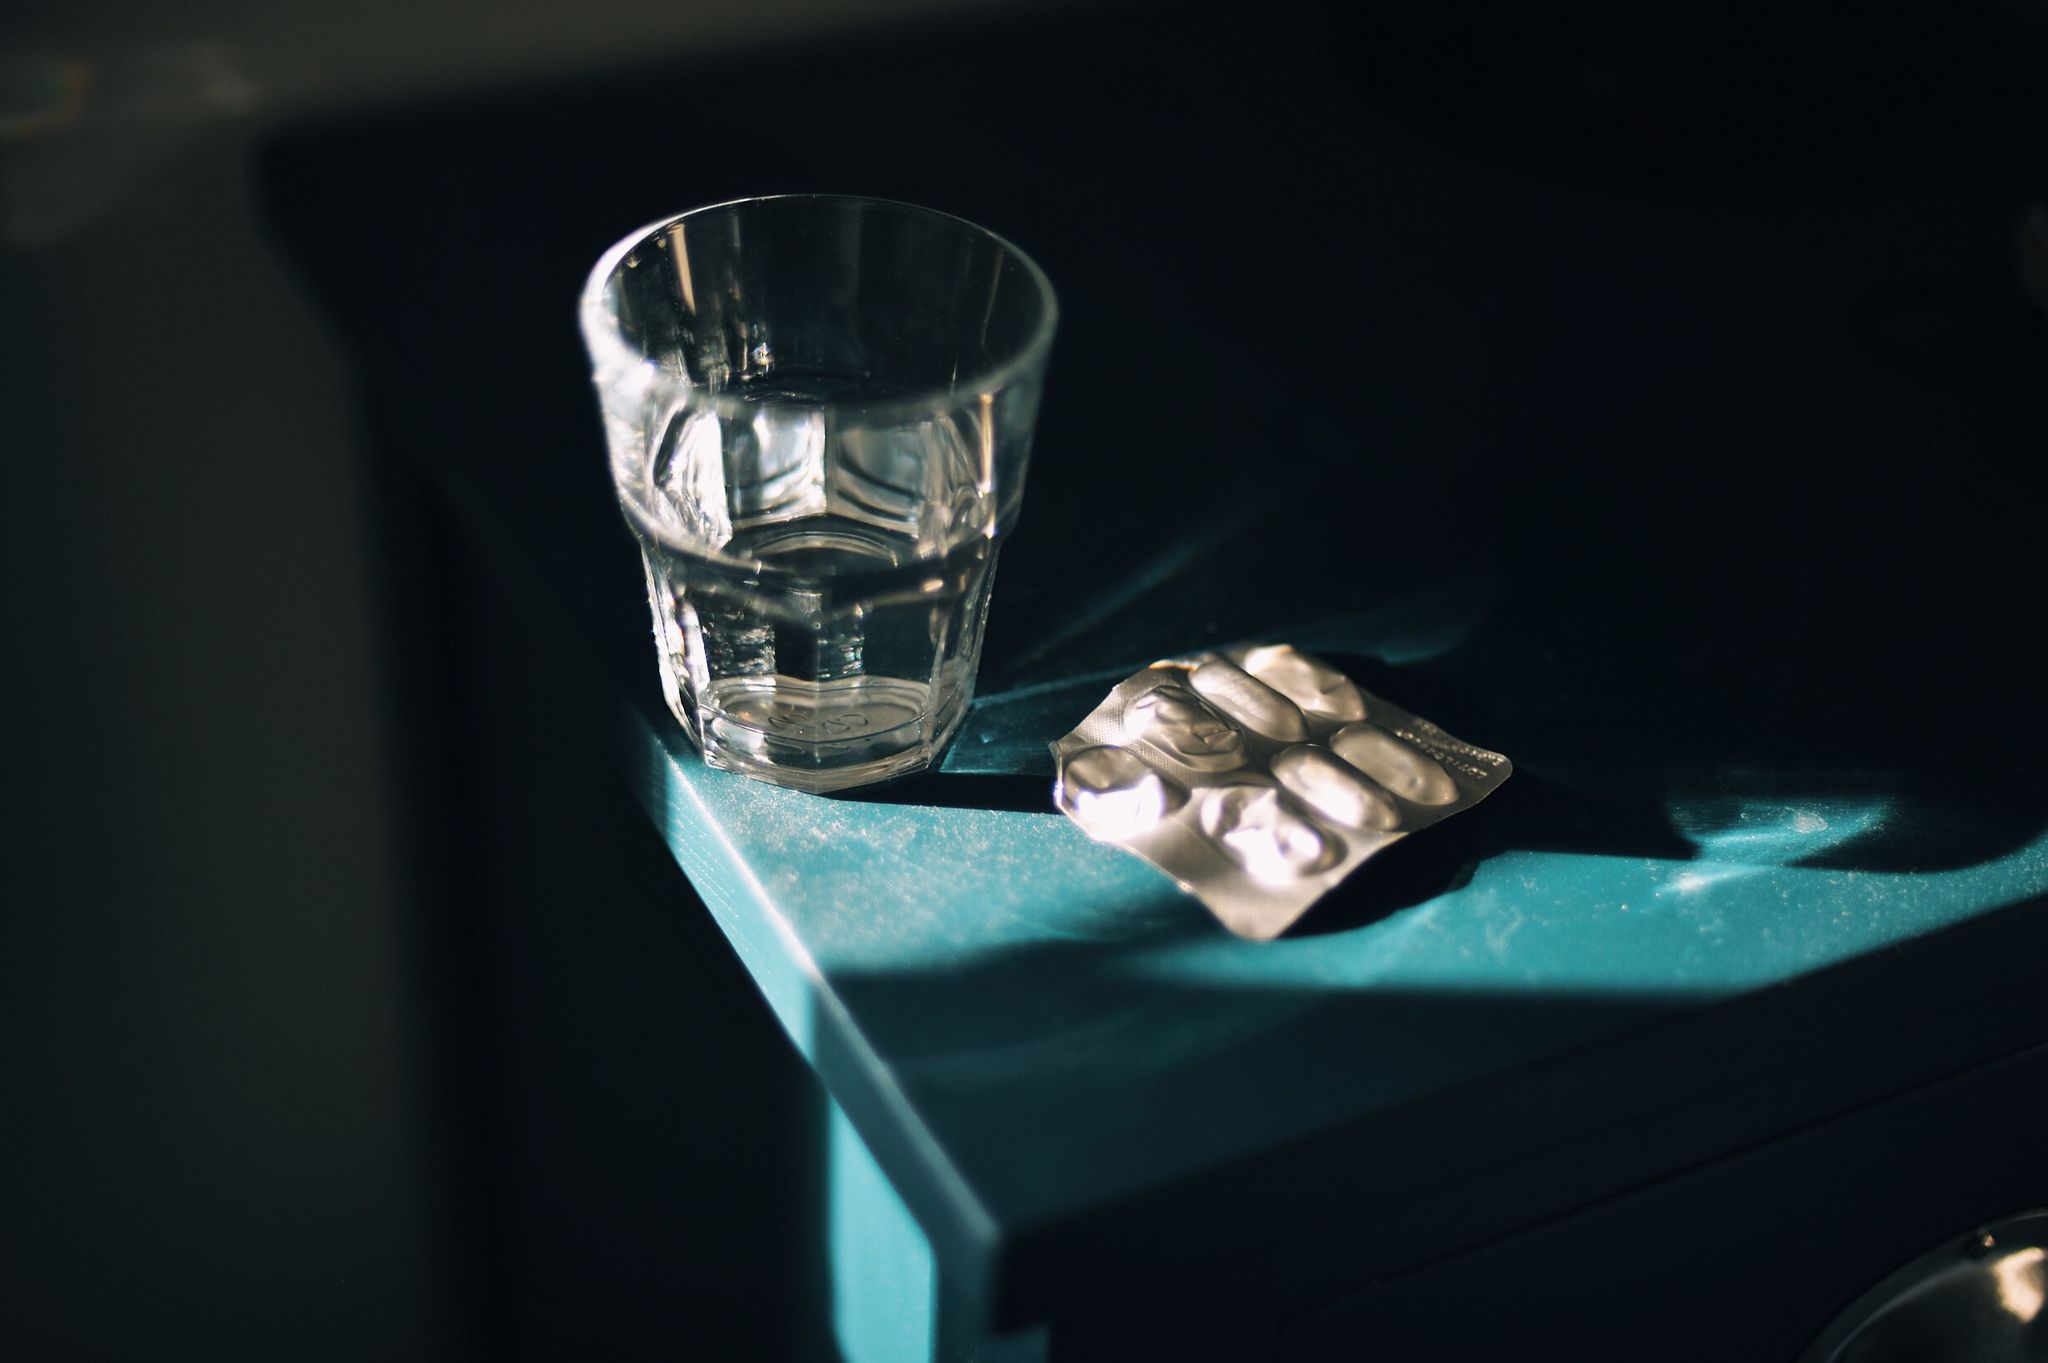 glass of water in strong sunlight on blue bedside table with blister pack of medication pills